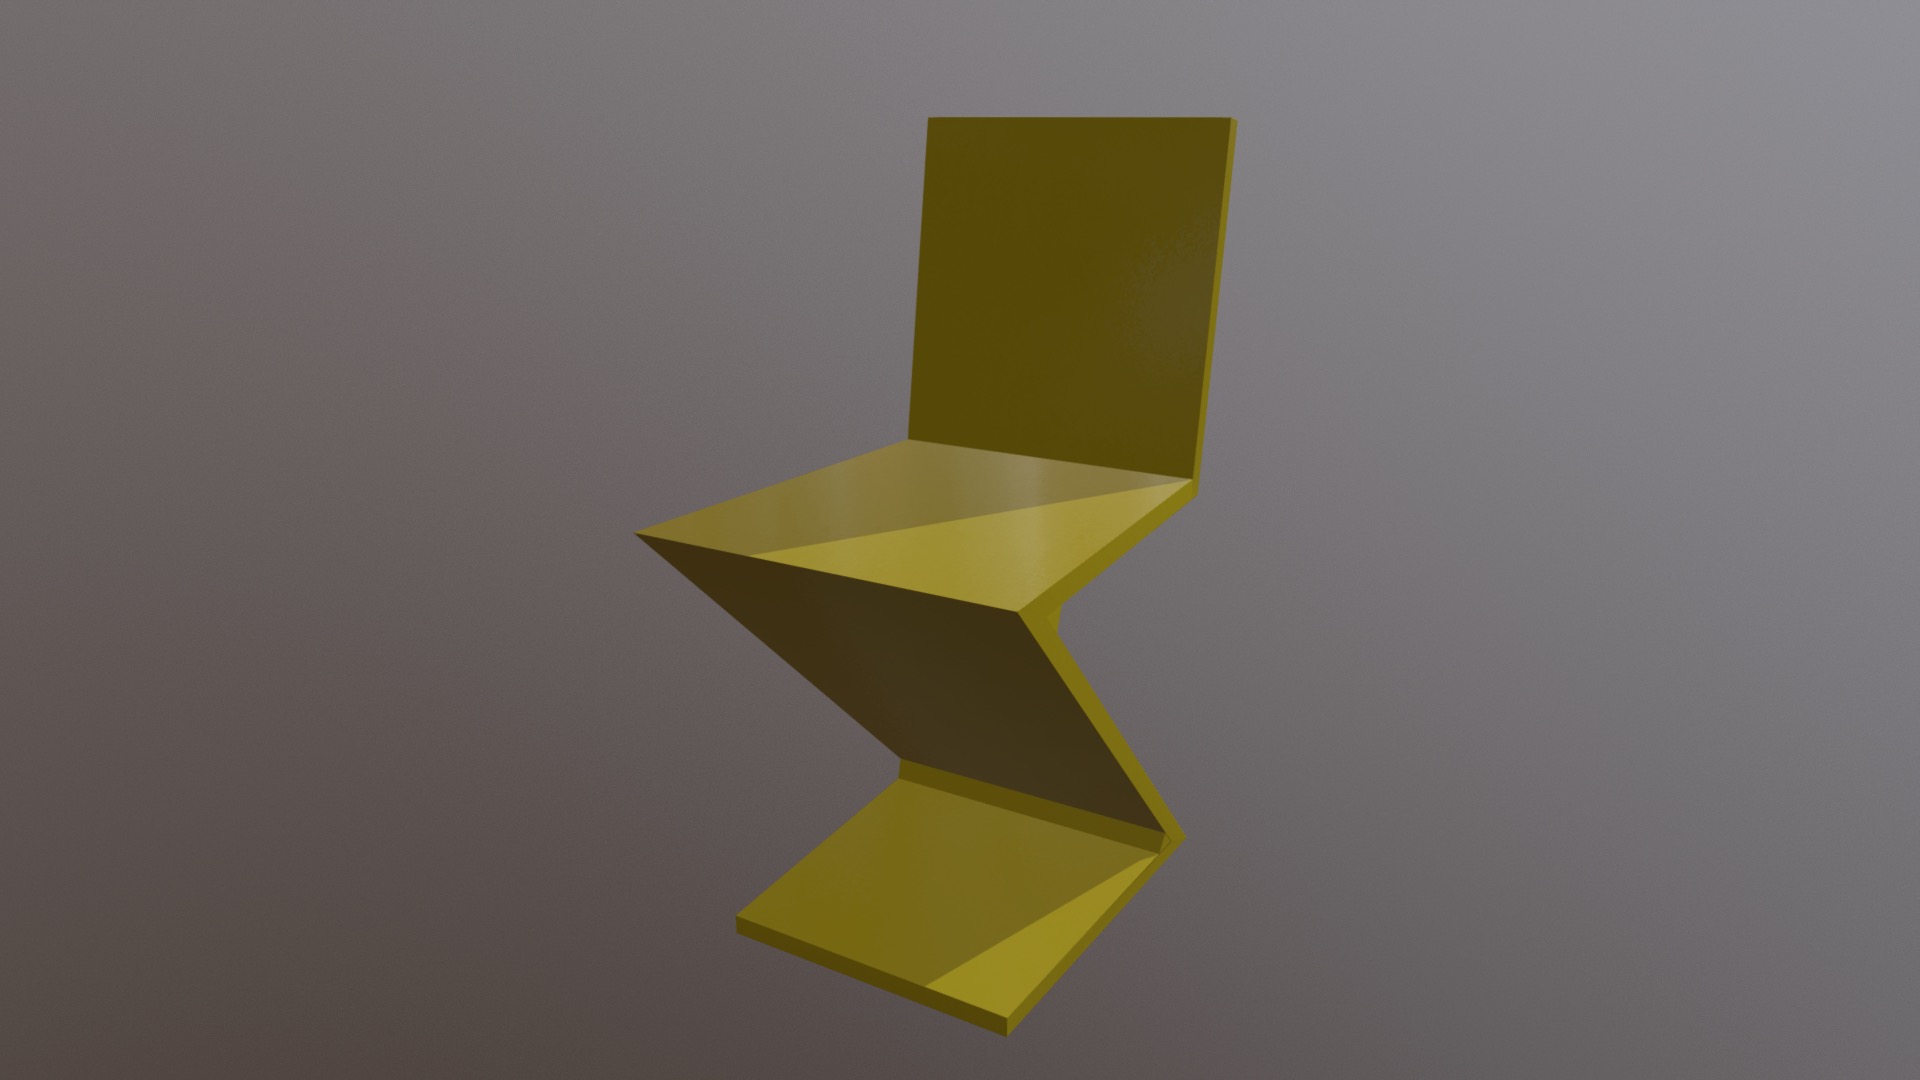 3D model Zig Zag Chair By Gerrit Thomas Rietveld - This is a 3D model of the Zig Zag Chair By Gerrit Thomas Rietveld. The 3D model is about a yellow letter on a grey background.